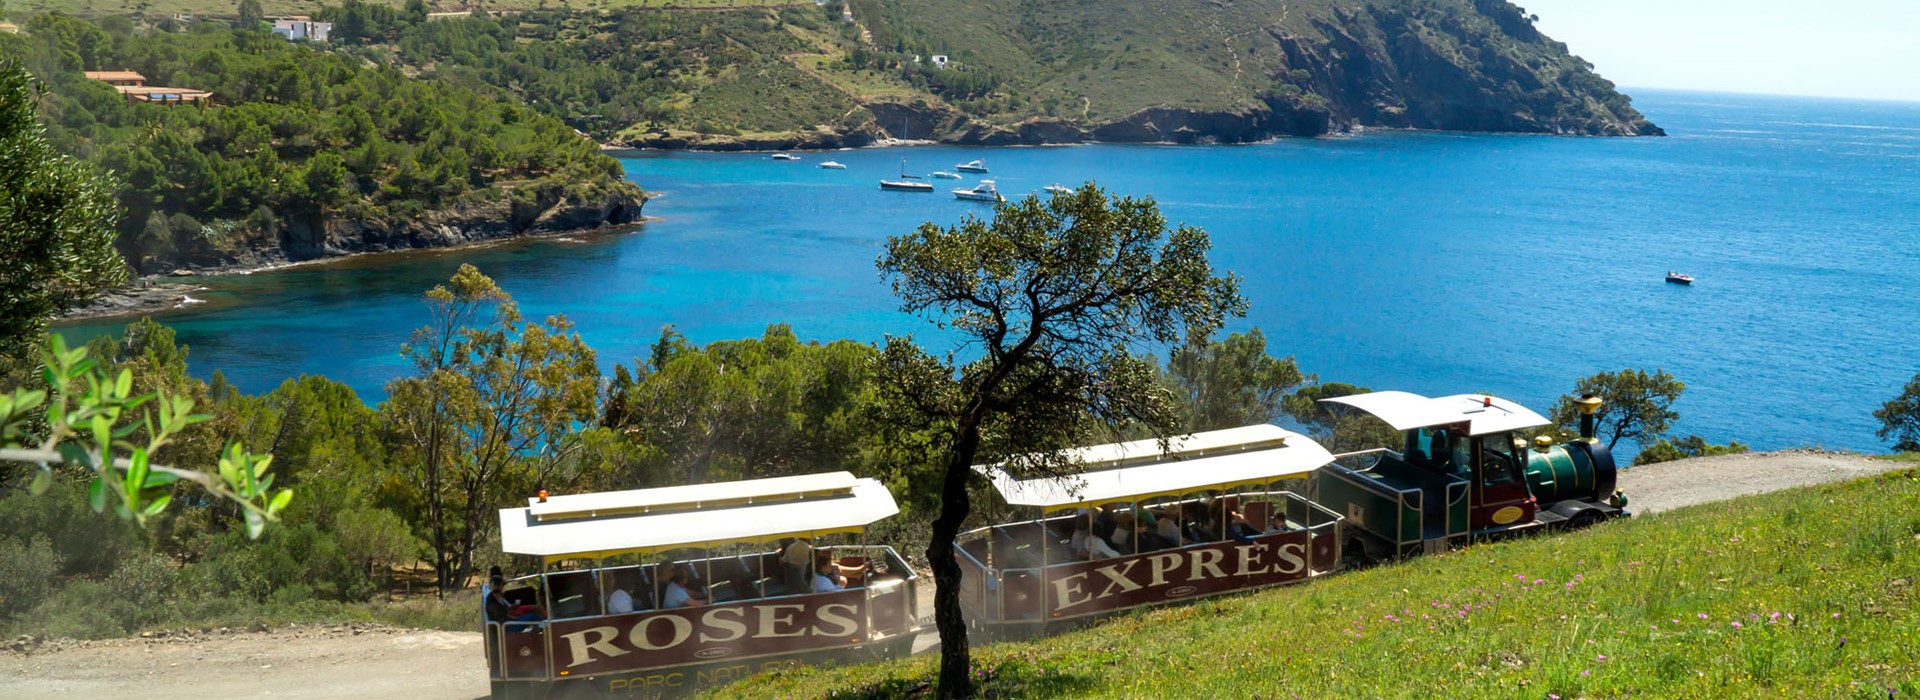 tourhub | Newmarket Holidays | Little Trains of the Pyrenees 7nts 